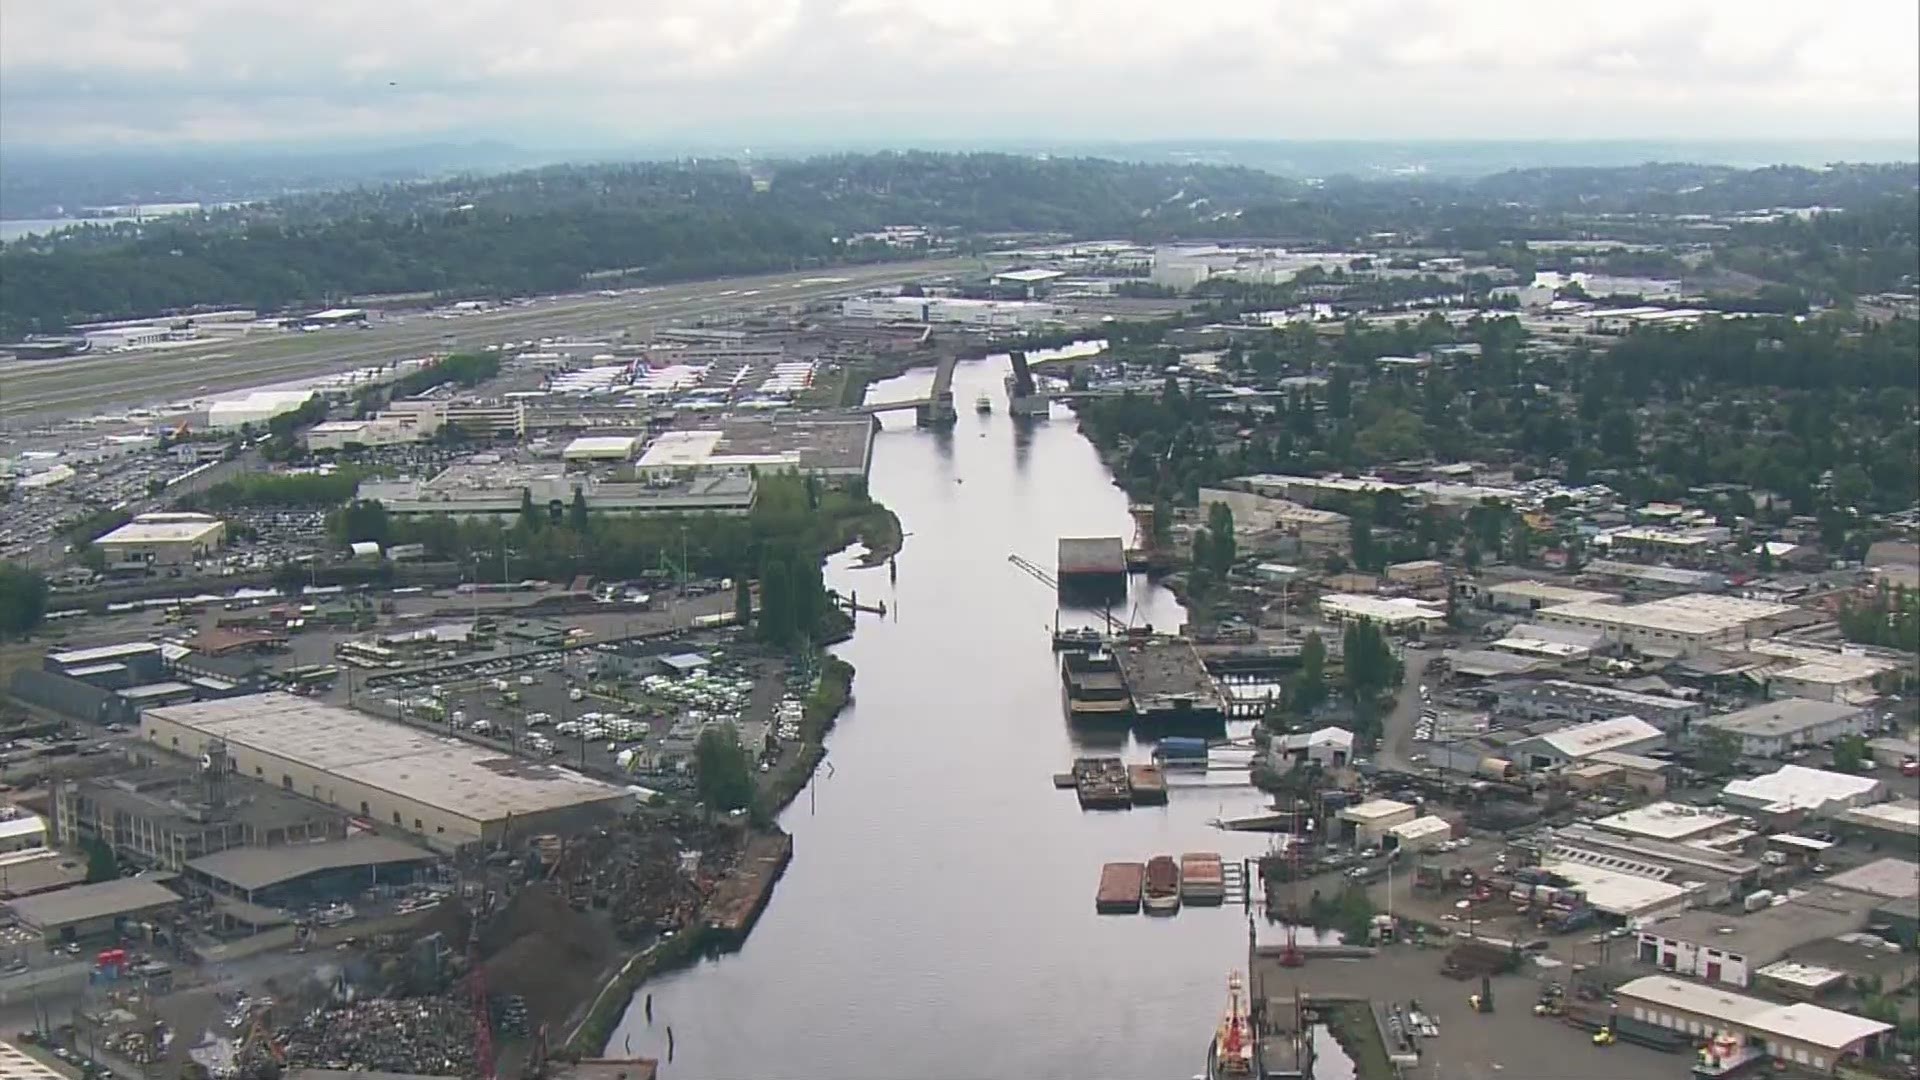 The public is asked to refrain from water activities on the Duwamish River as crews work to clean up a 320,000 gallon sewage spill.